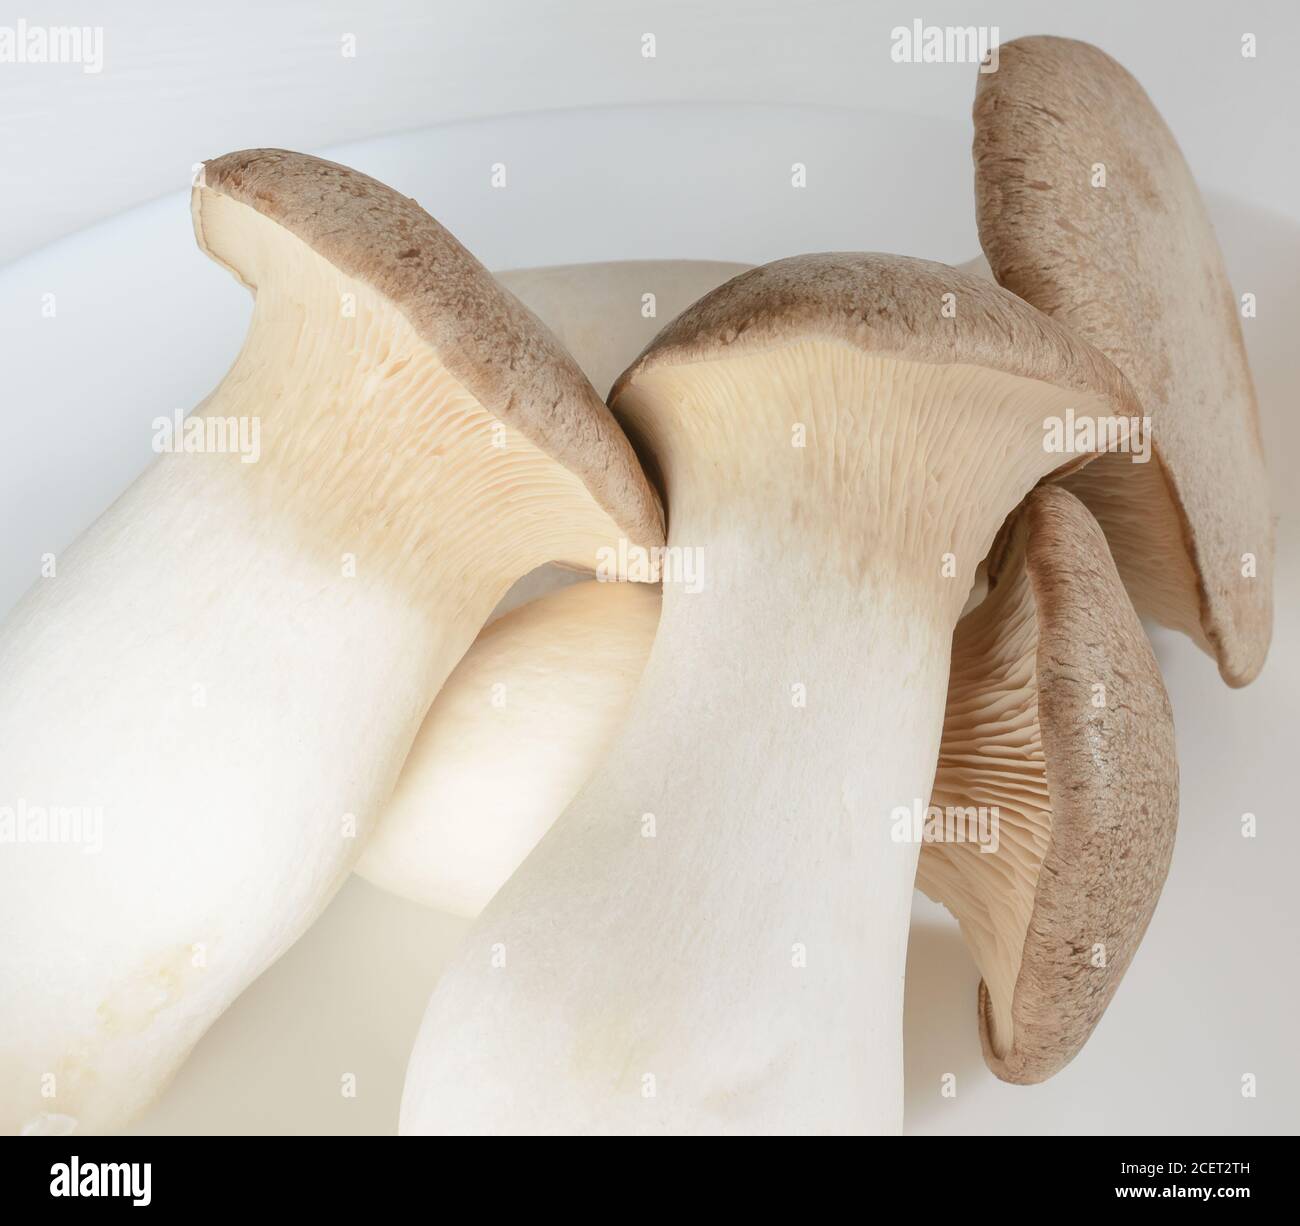 Several mushrooms on a white plate, a close up Stock Photo